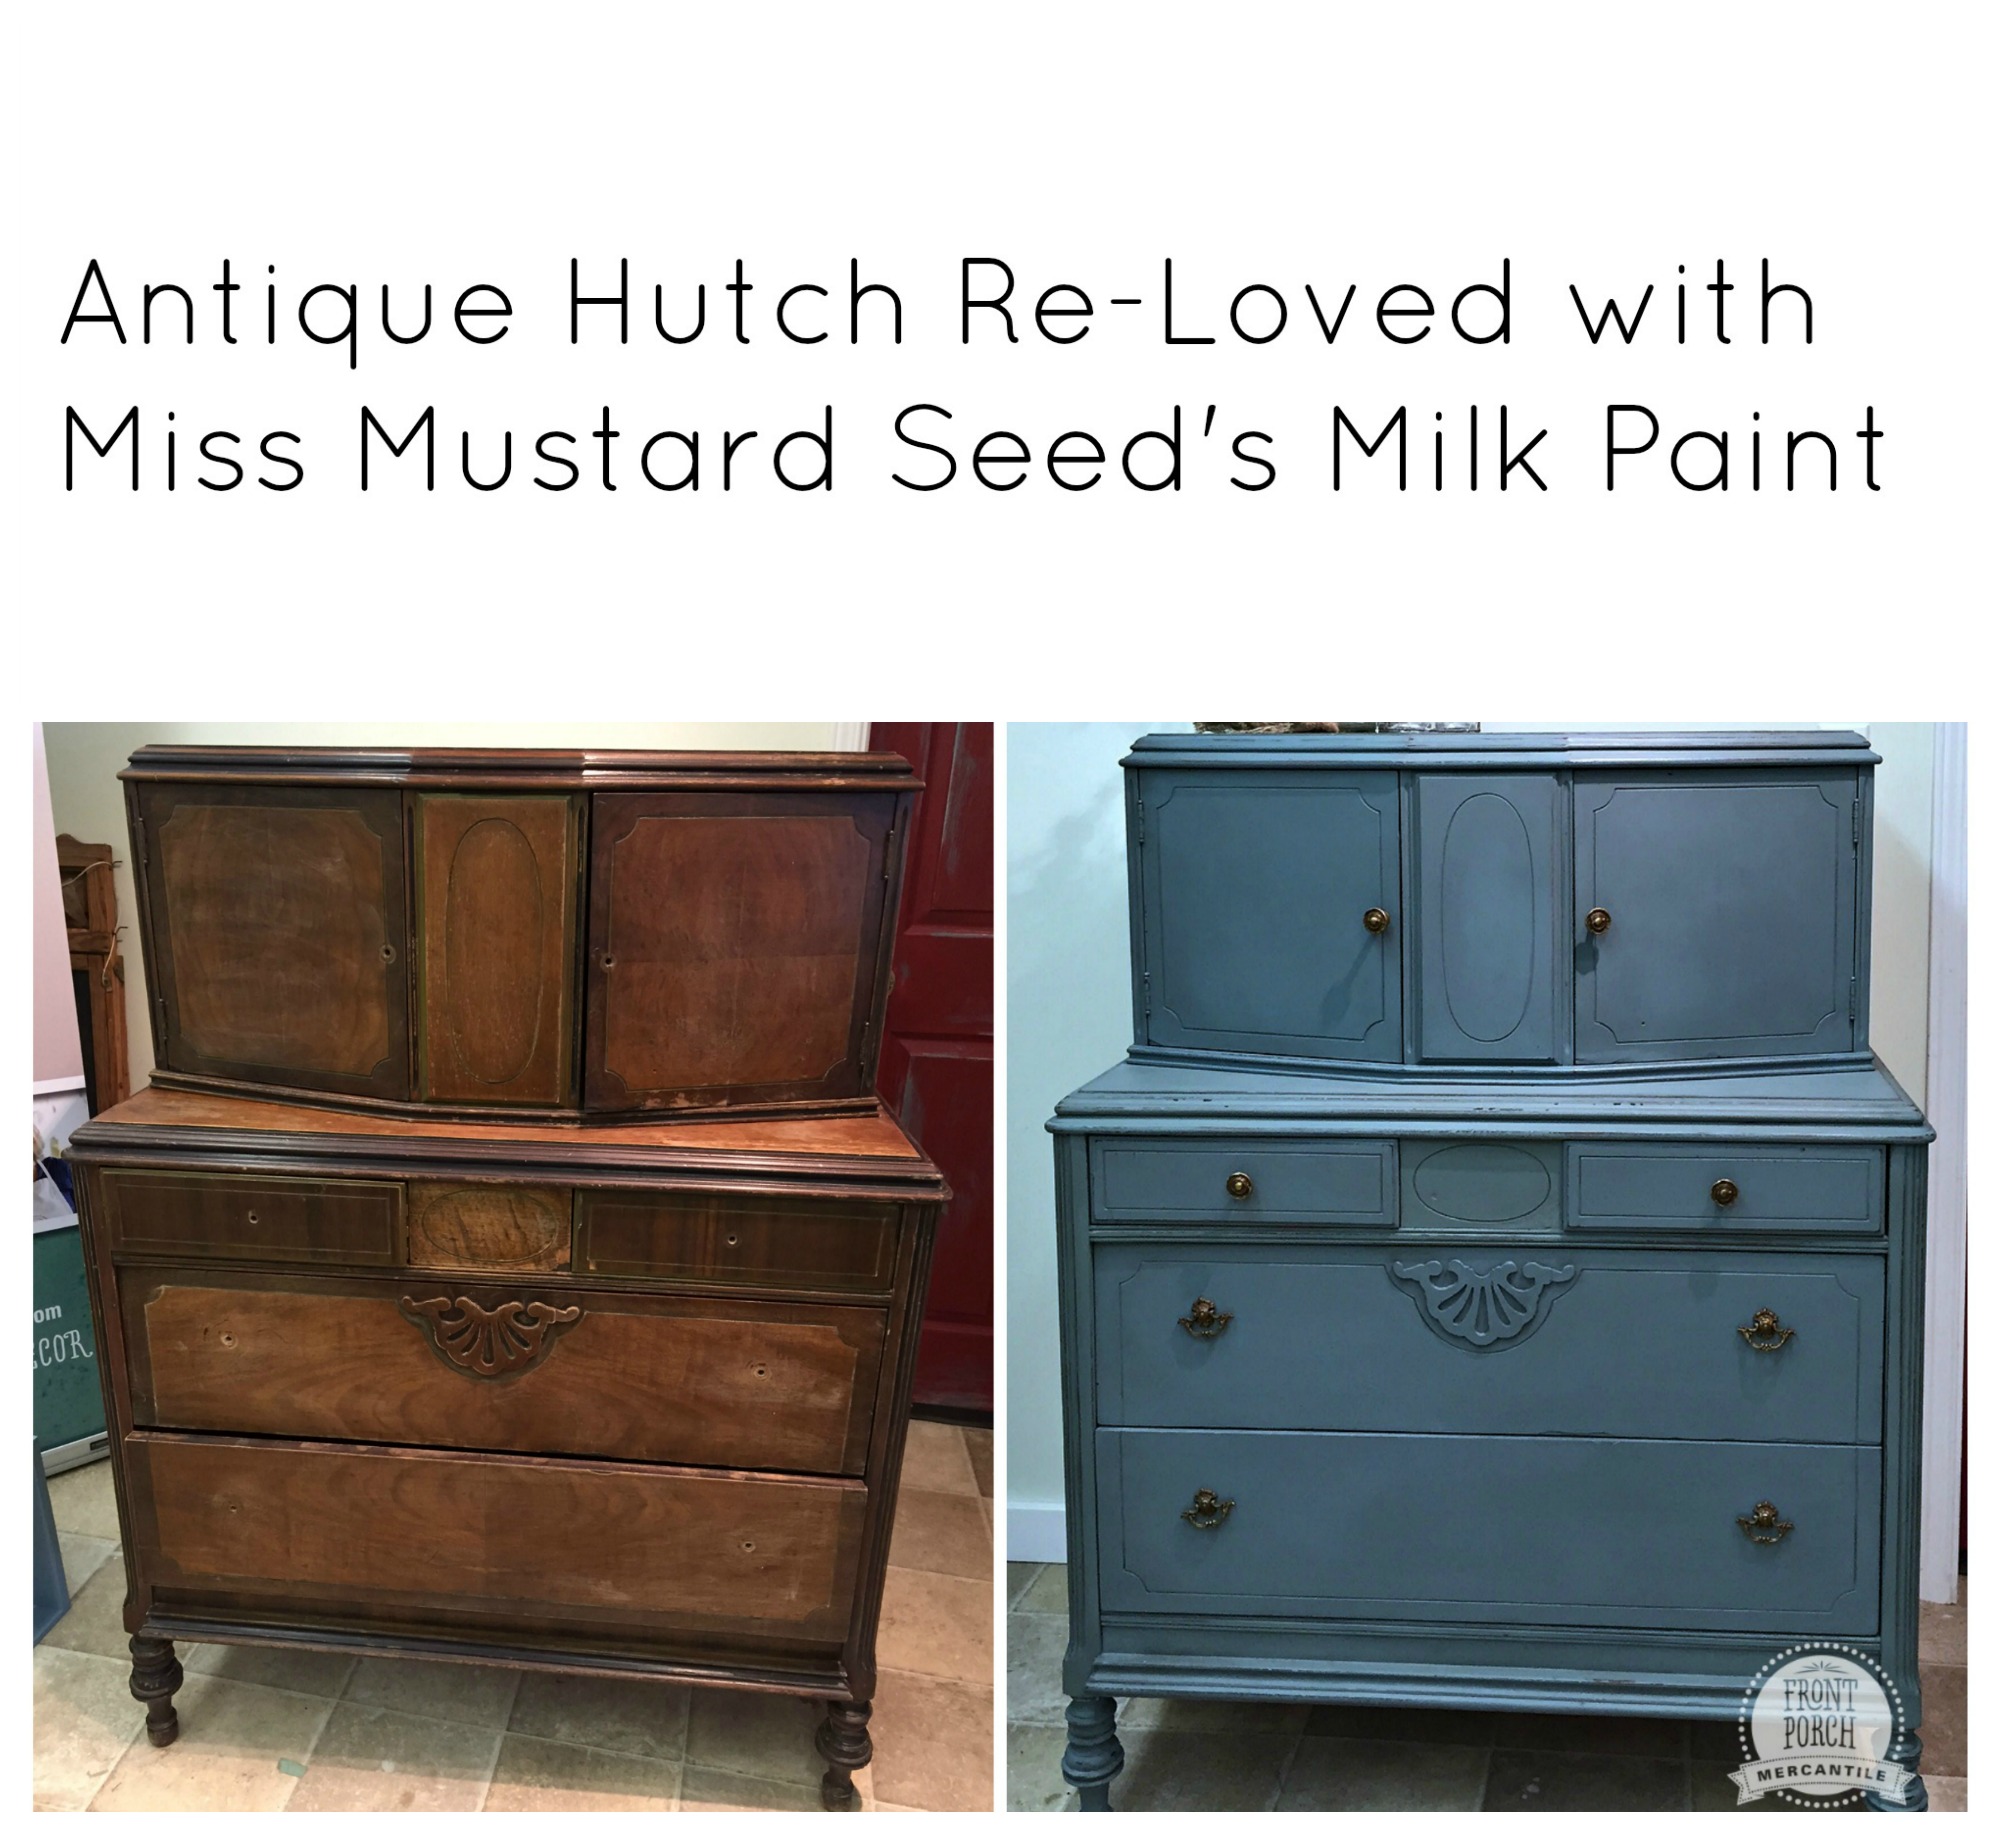 antique hutch re-loved at Front Porch Mercantile